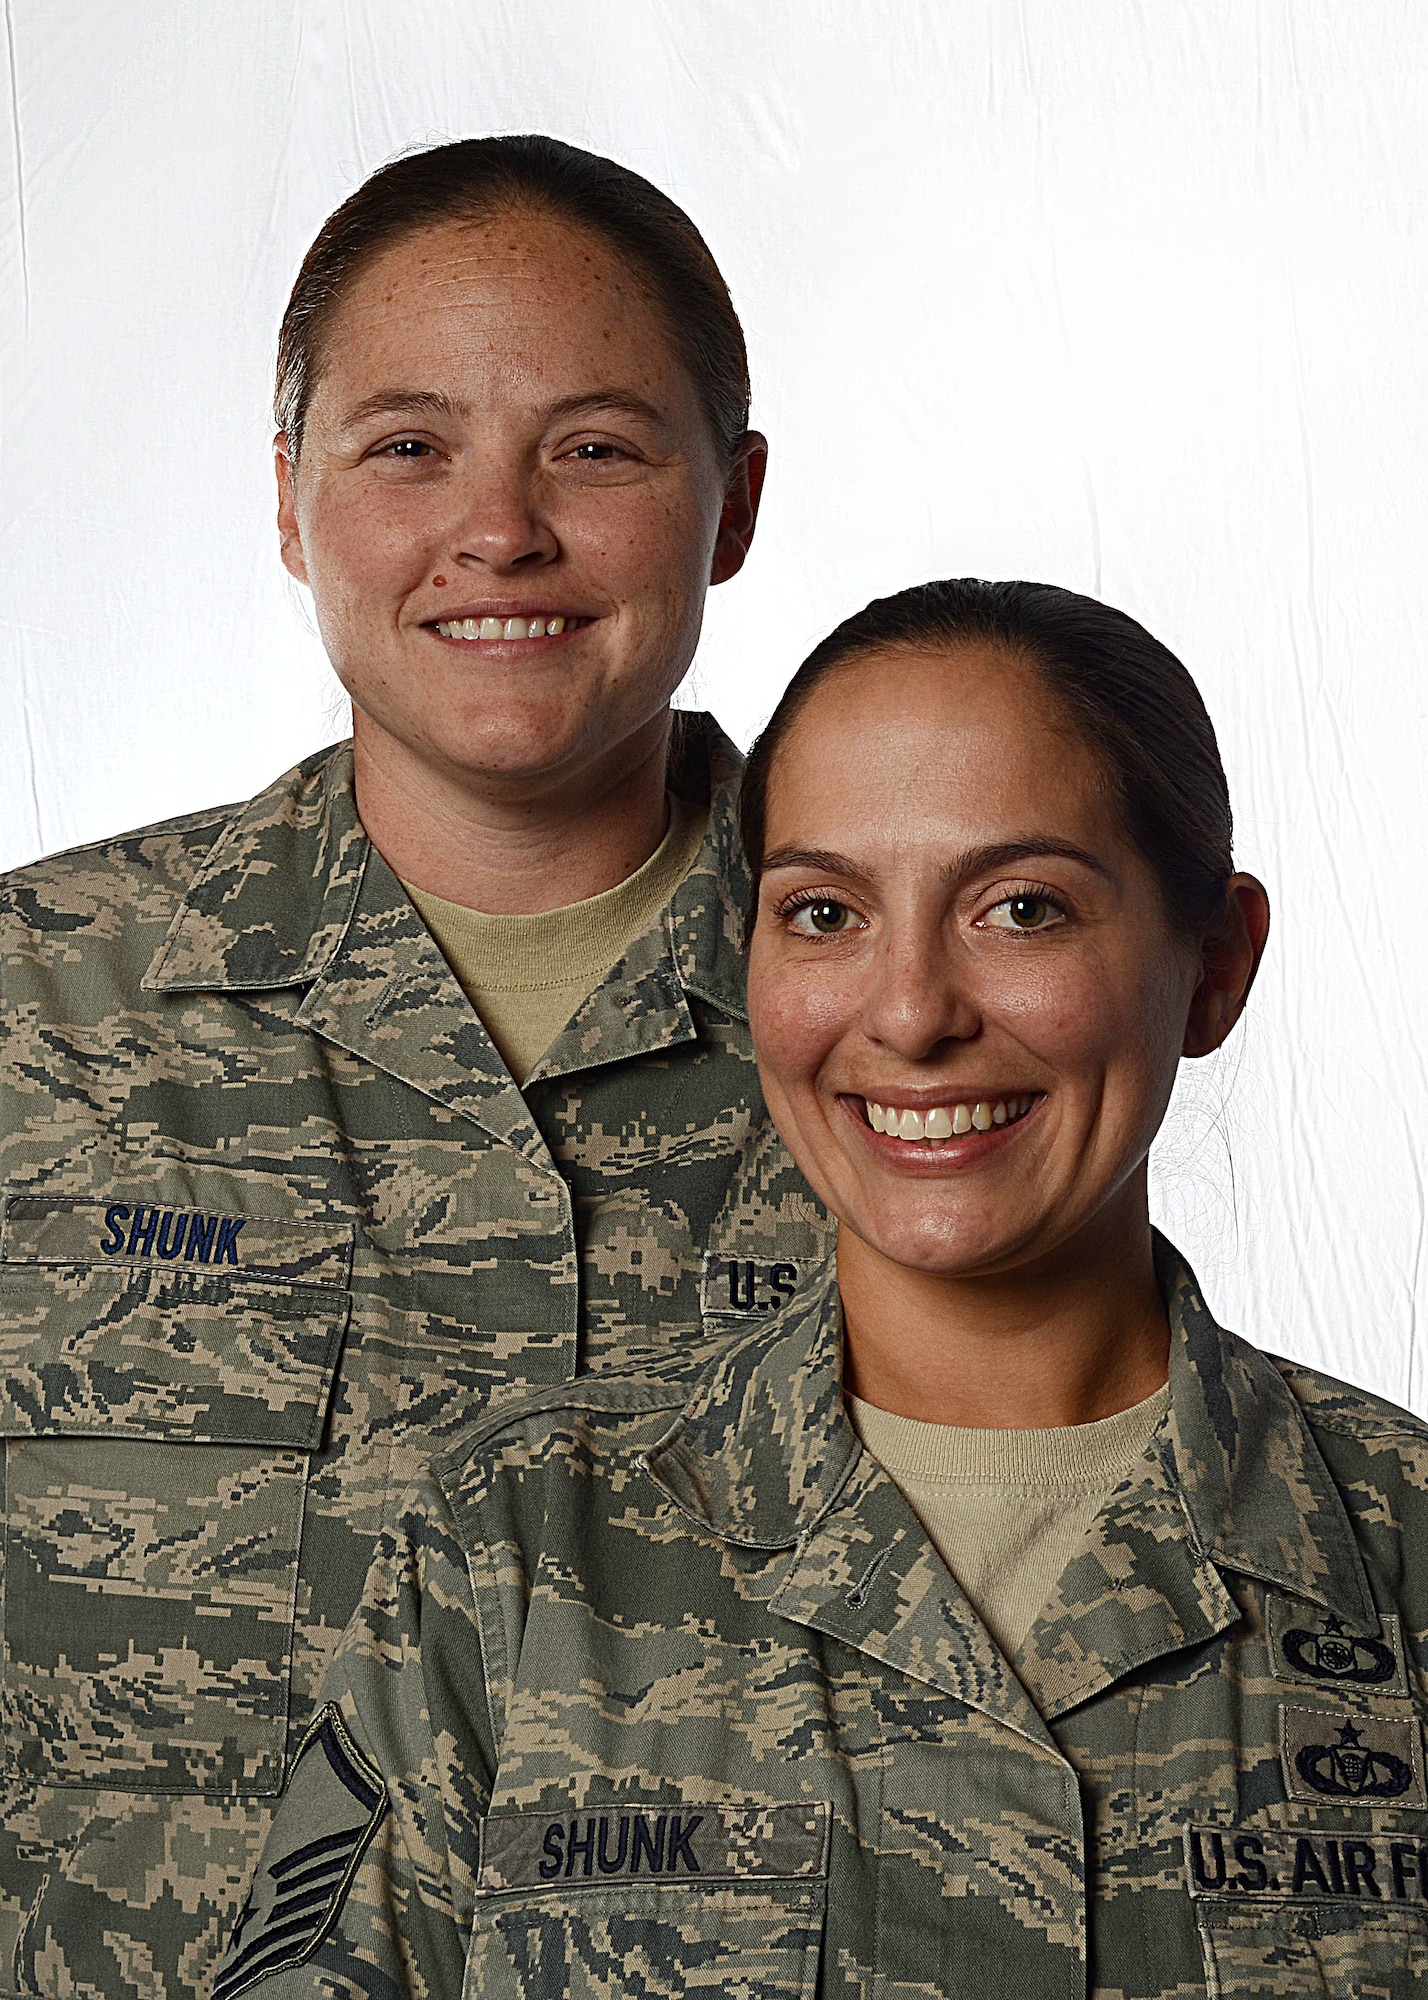 Tech. Sgt. Stacy Shunk, and Master Sgt. Angela Shunk, both assigned to Aviano Air Base, Italy, are the first Air Force same-sex couple to be accepted for an assignment under the join spouse program.